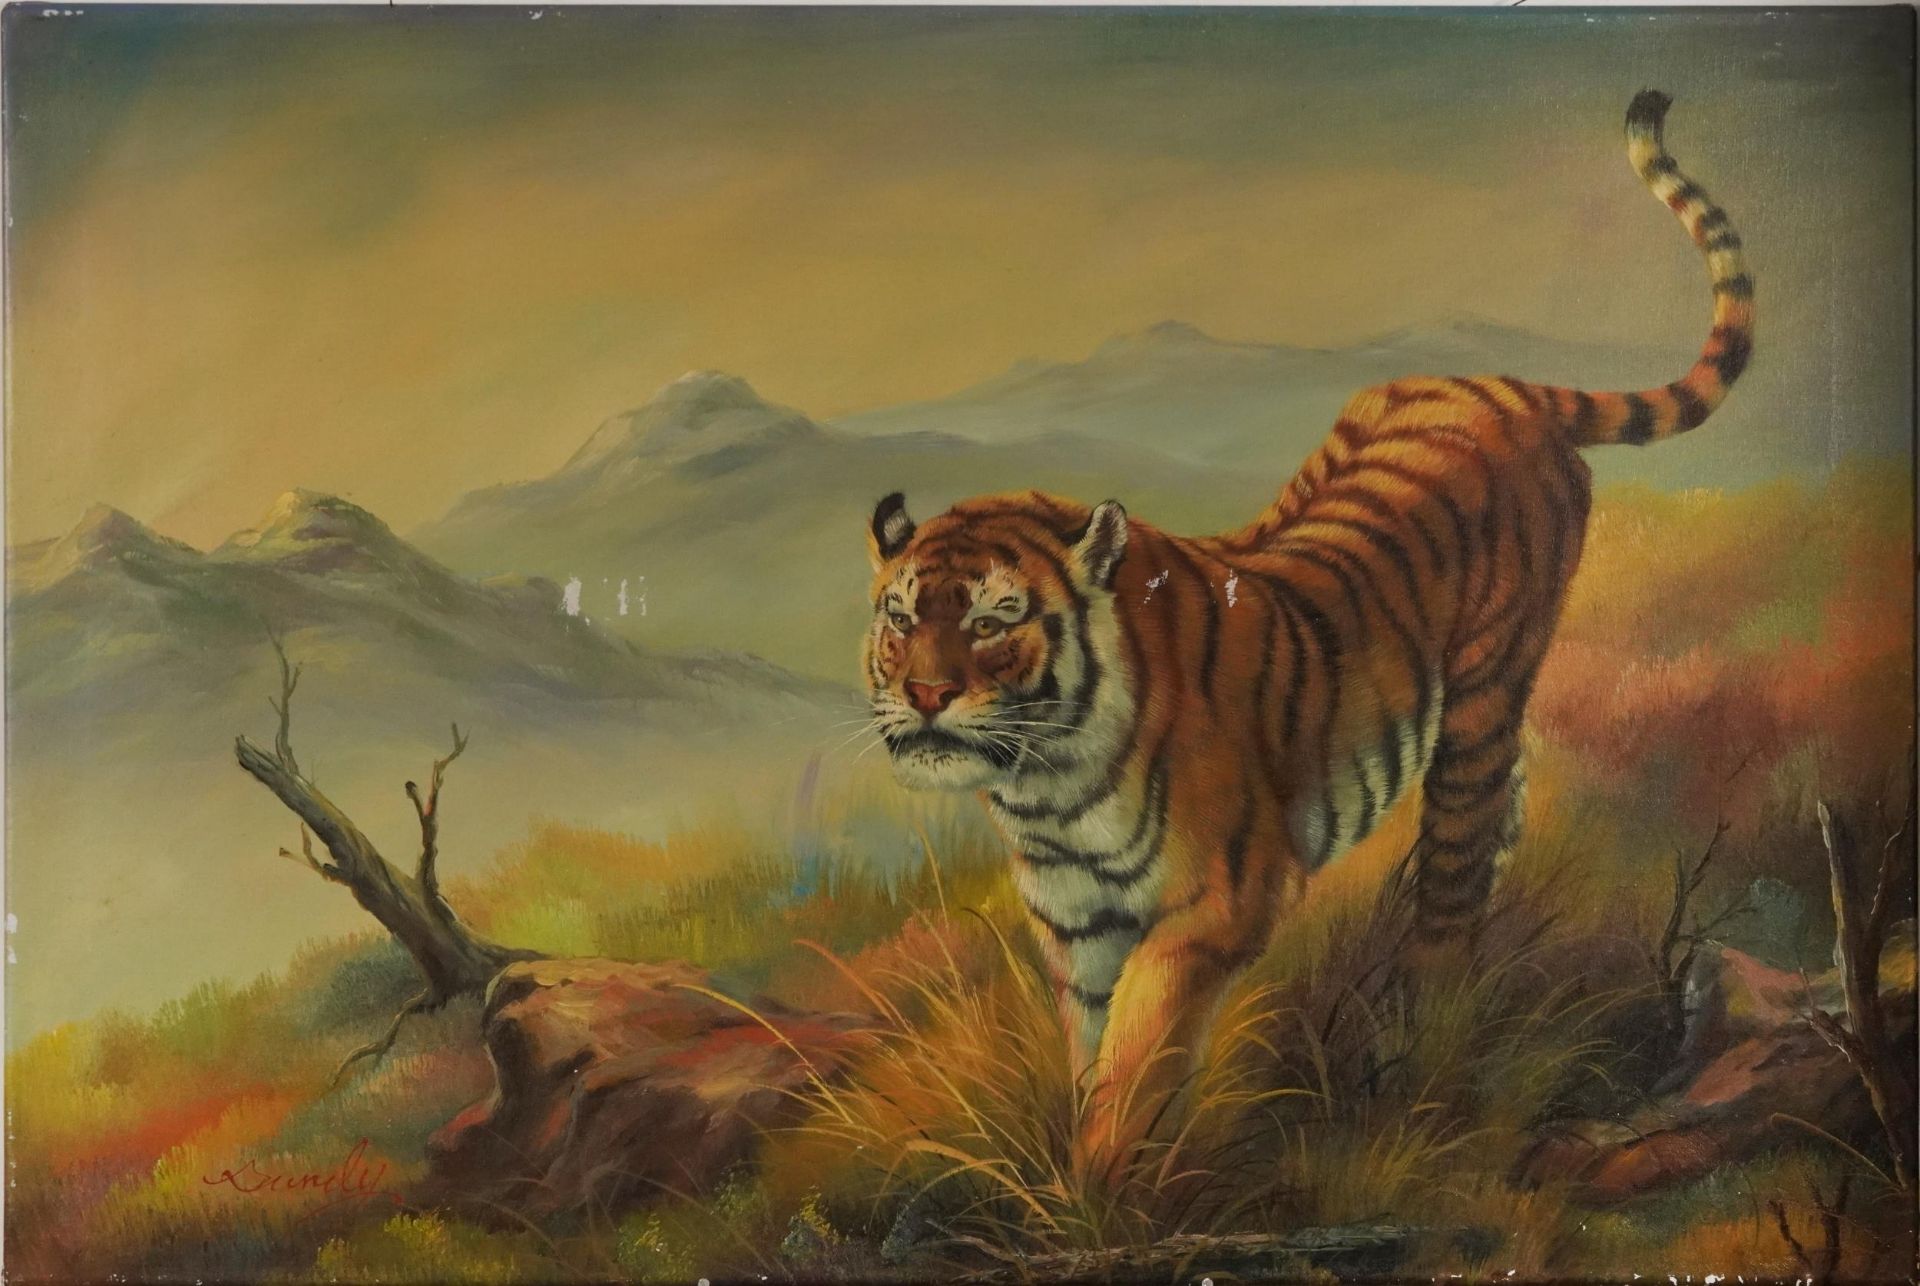 Tiger before a mountainous landscape, oil on canvas, indistinctly signed, possibly Bundy, - Image 2 of 4